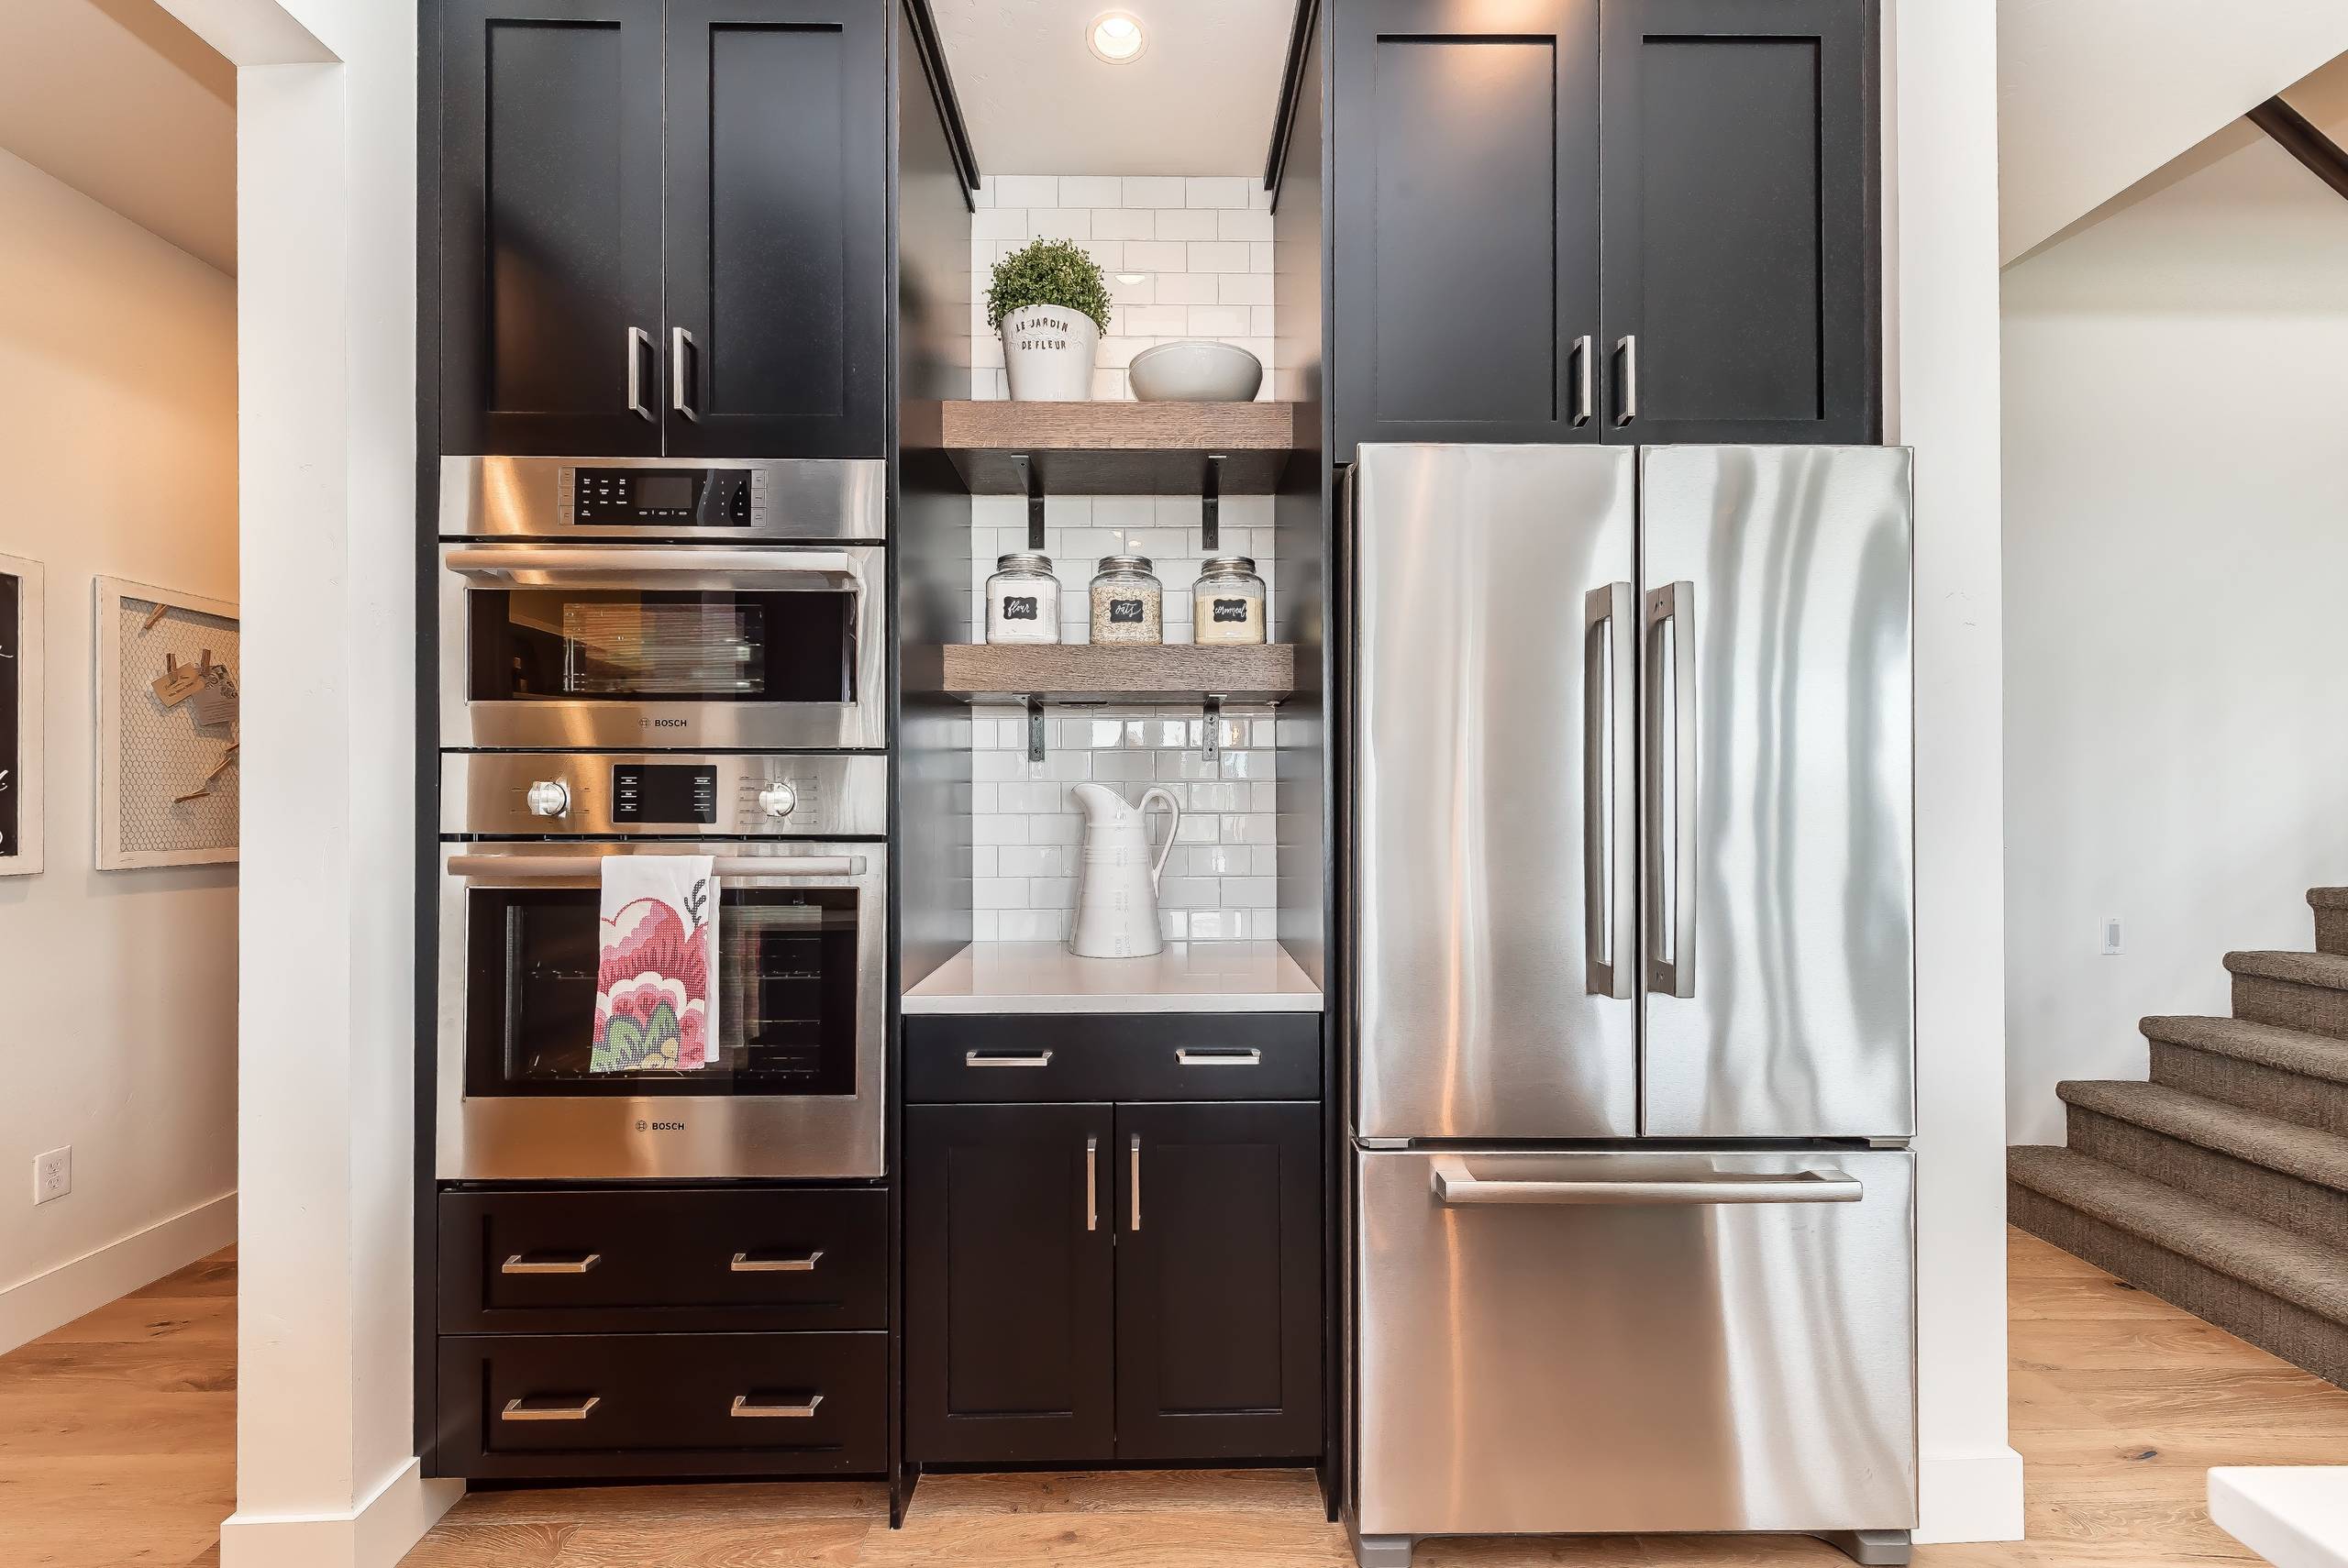 What Is The Standard Size Of A Counter-depth Refrigerator